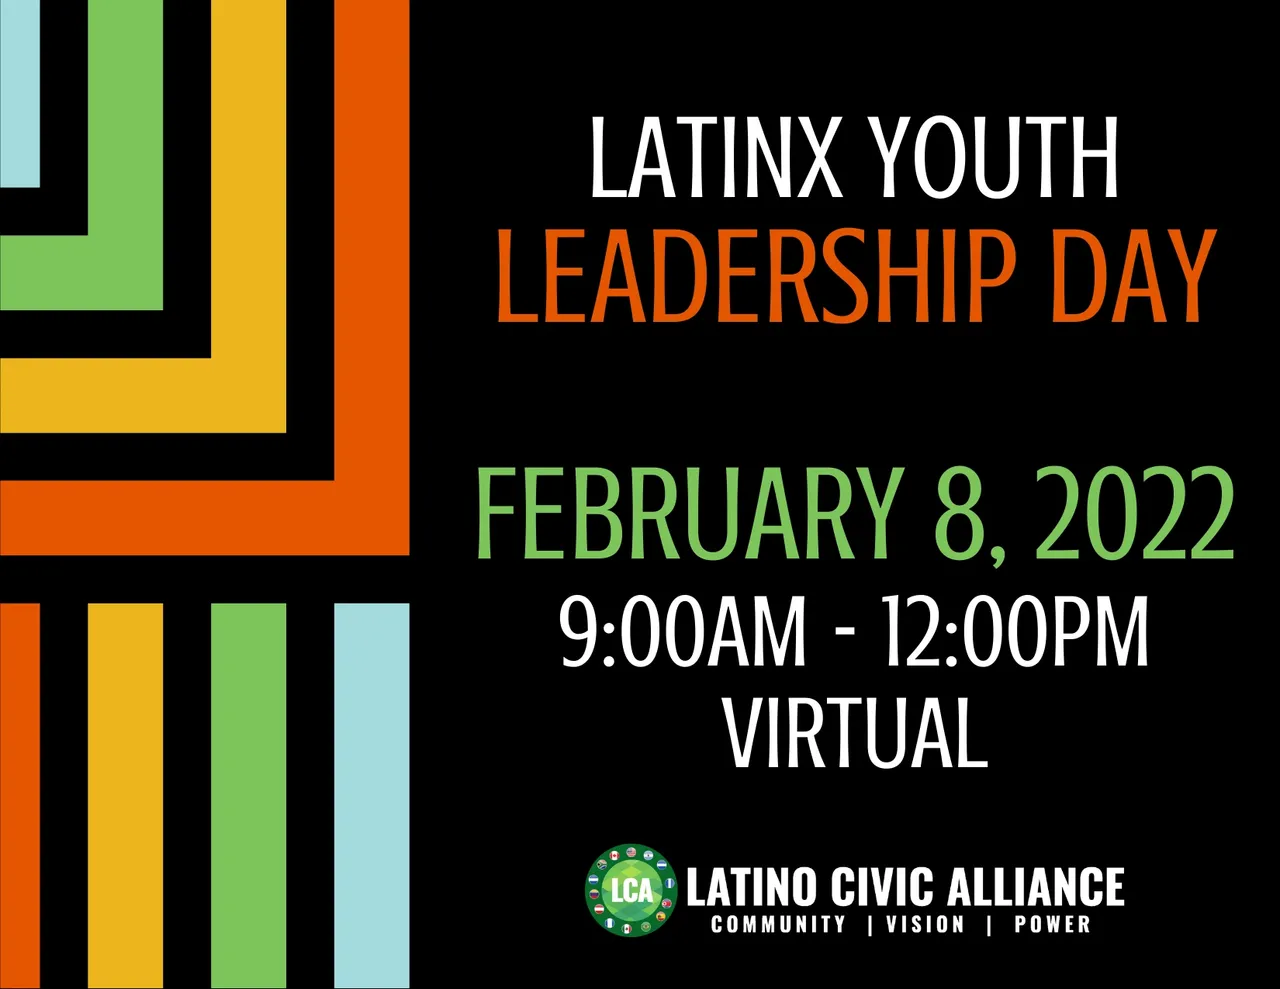 2022 LatinX Youth Leadership Day on FEBRUARY 8TH, 2022 | 9AM - 12PM